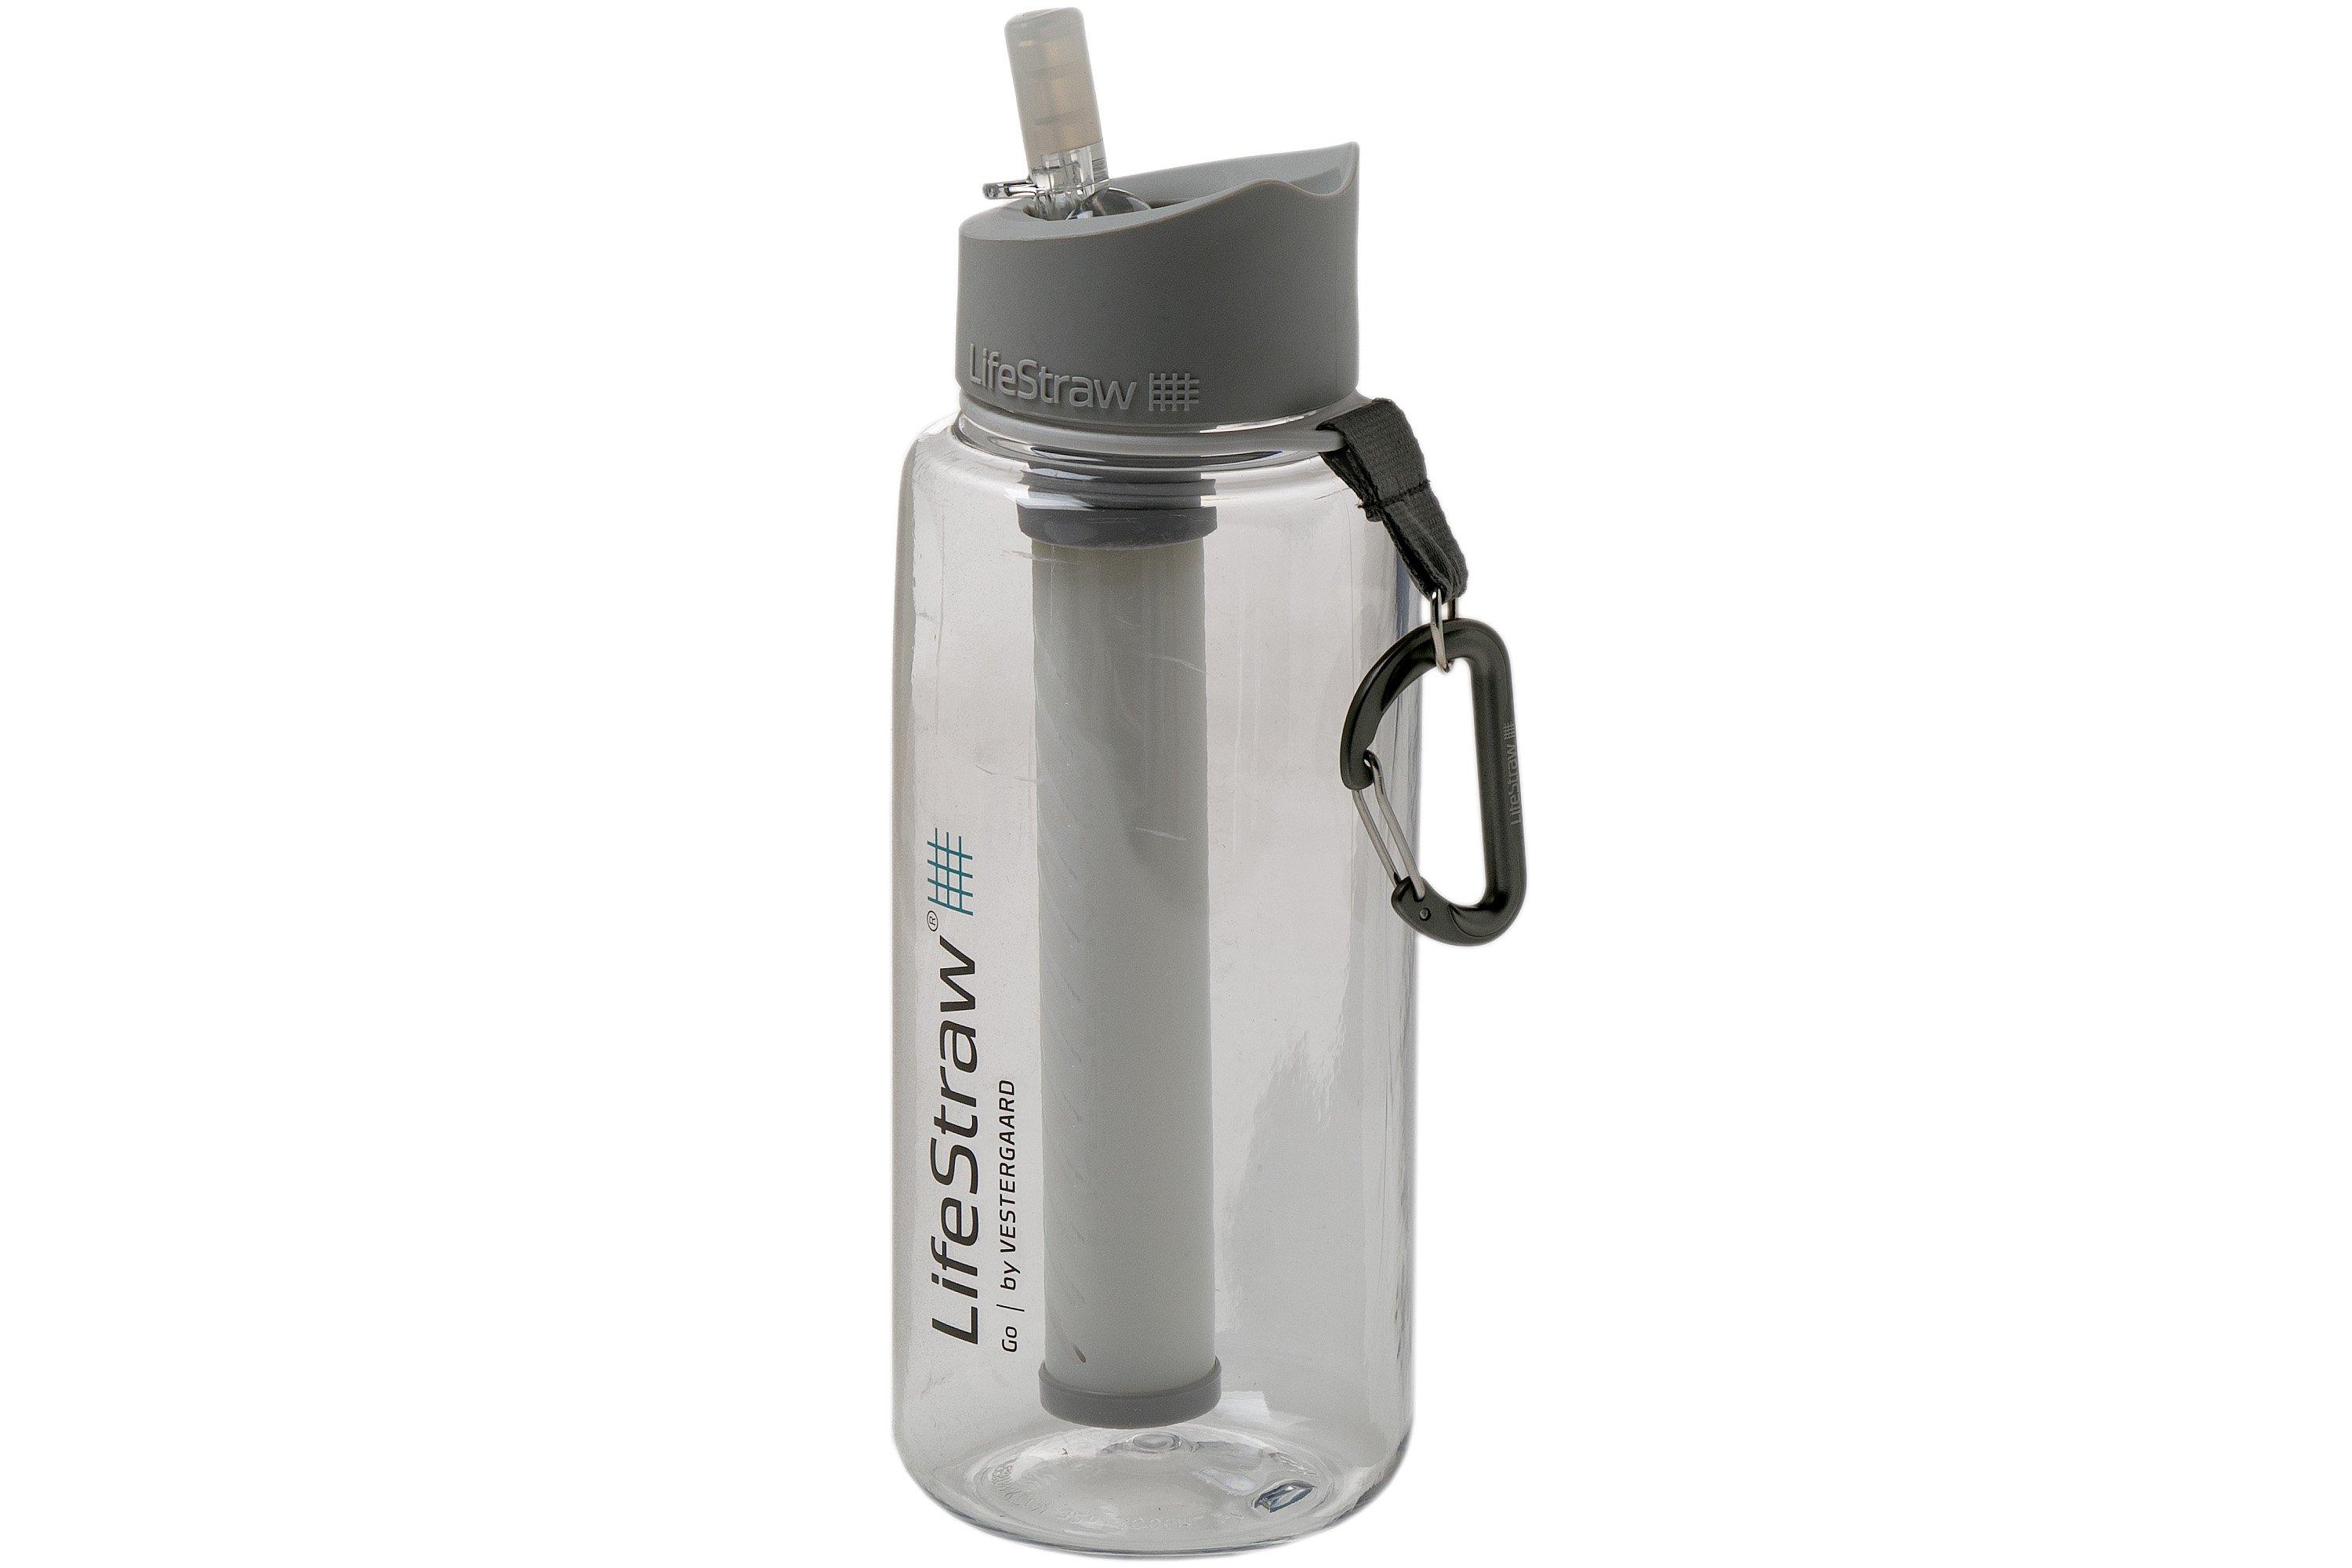 LifeStraw Go 2-stage water bottle with filter 1 litre, clear